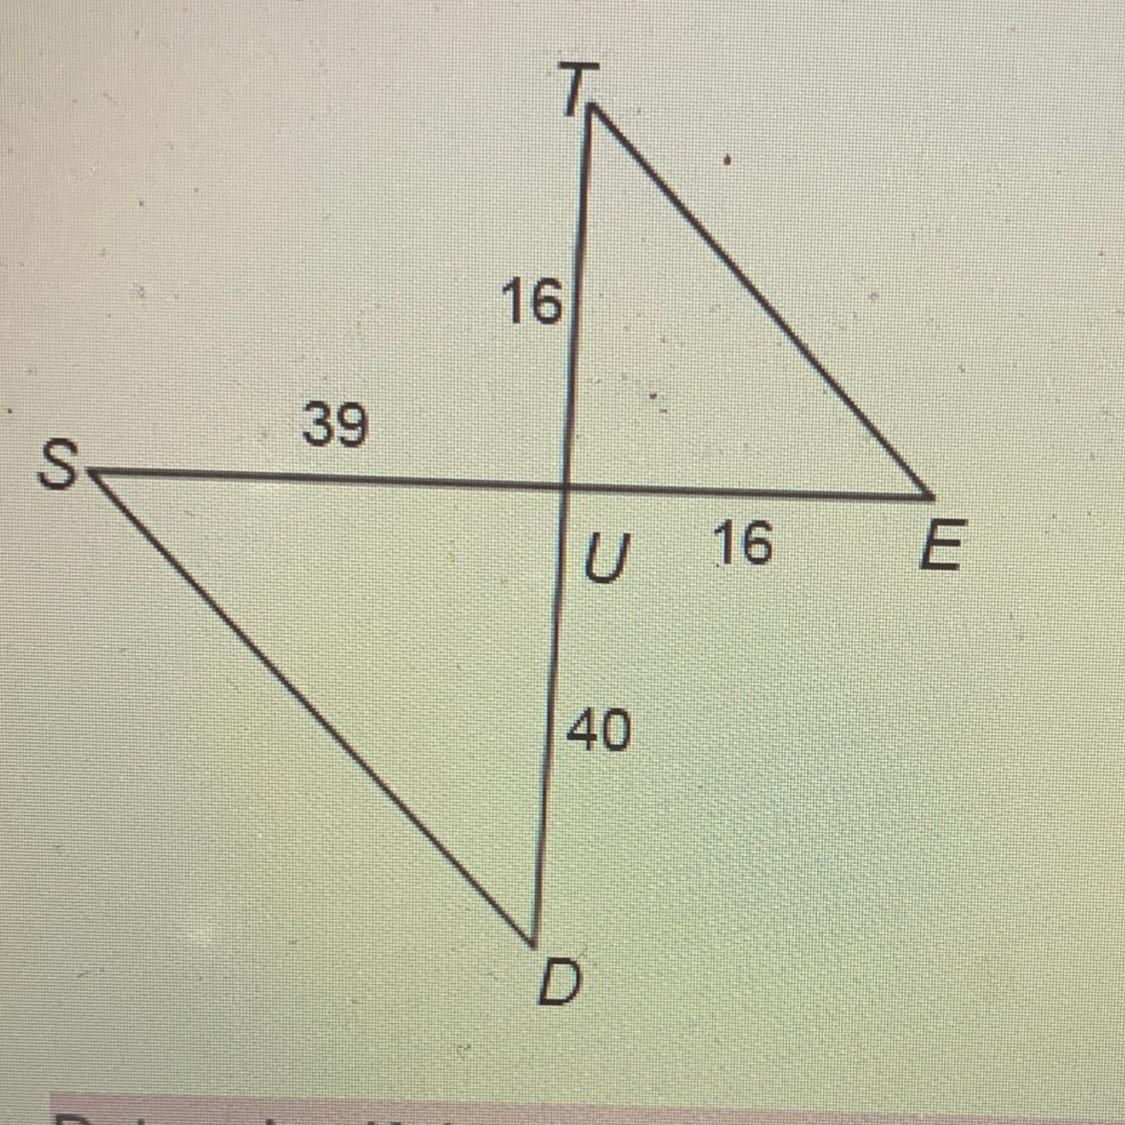 Determine If The Two Triangles Shown Are Similar. If So, Write The Similarity Statement.Question 16 Options:A)